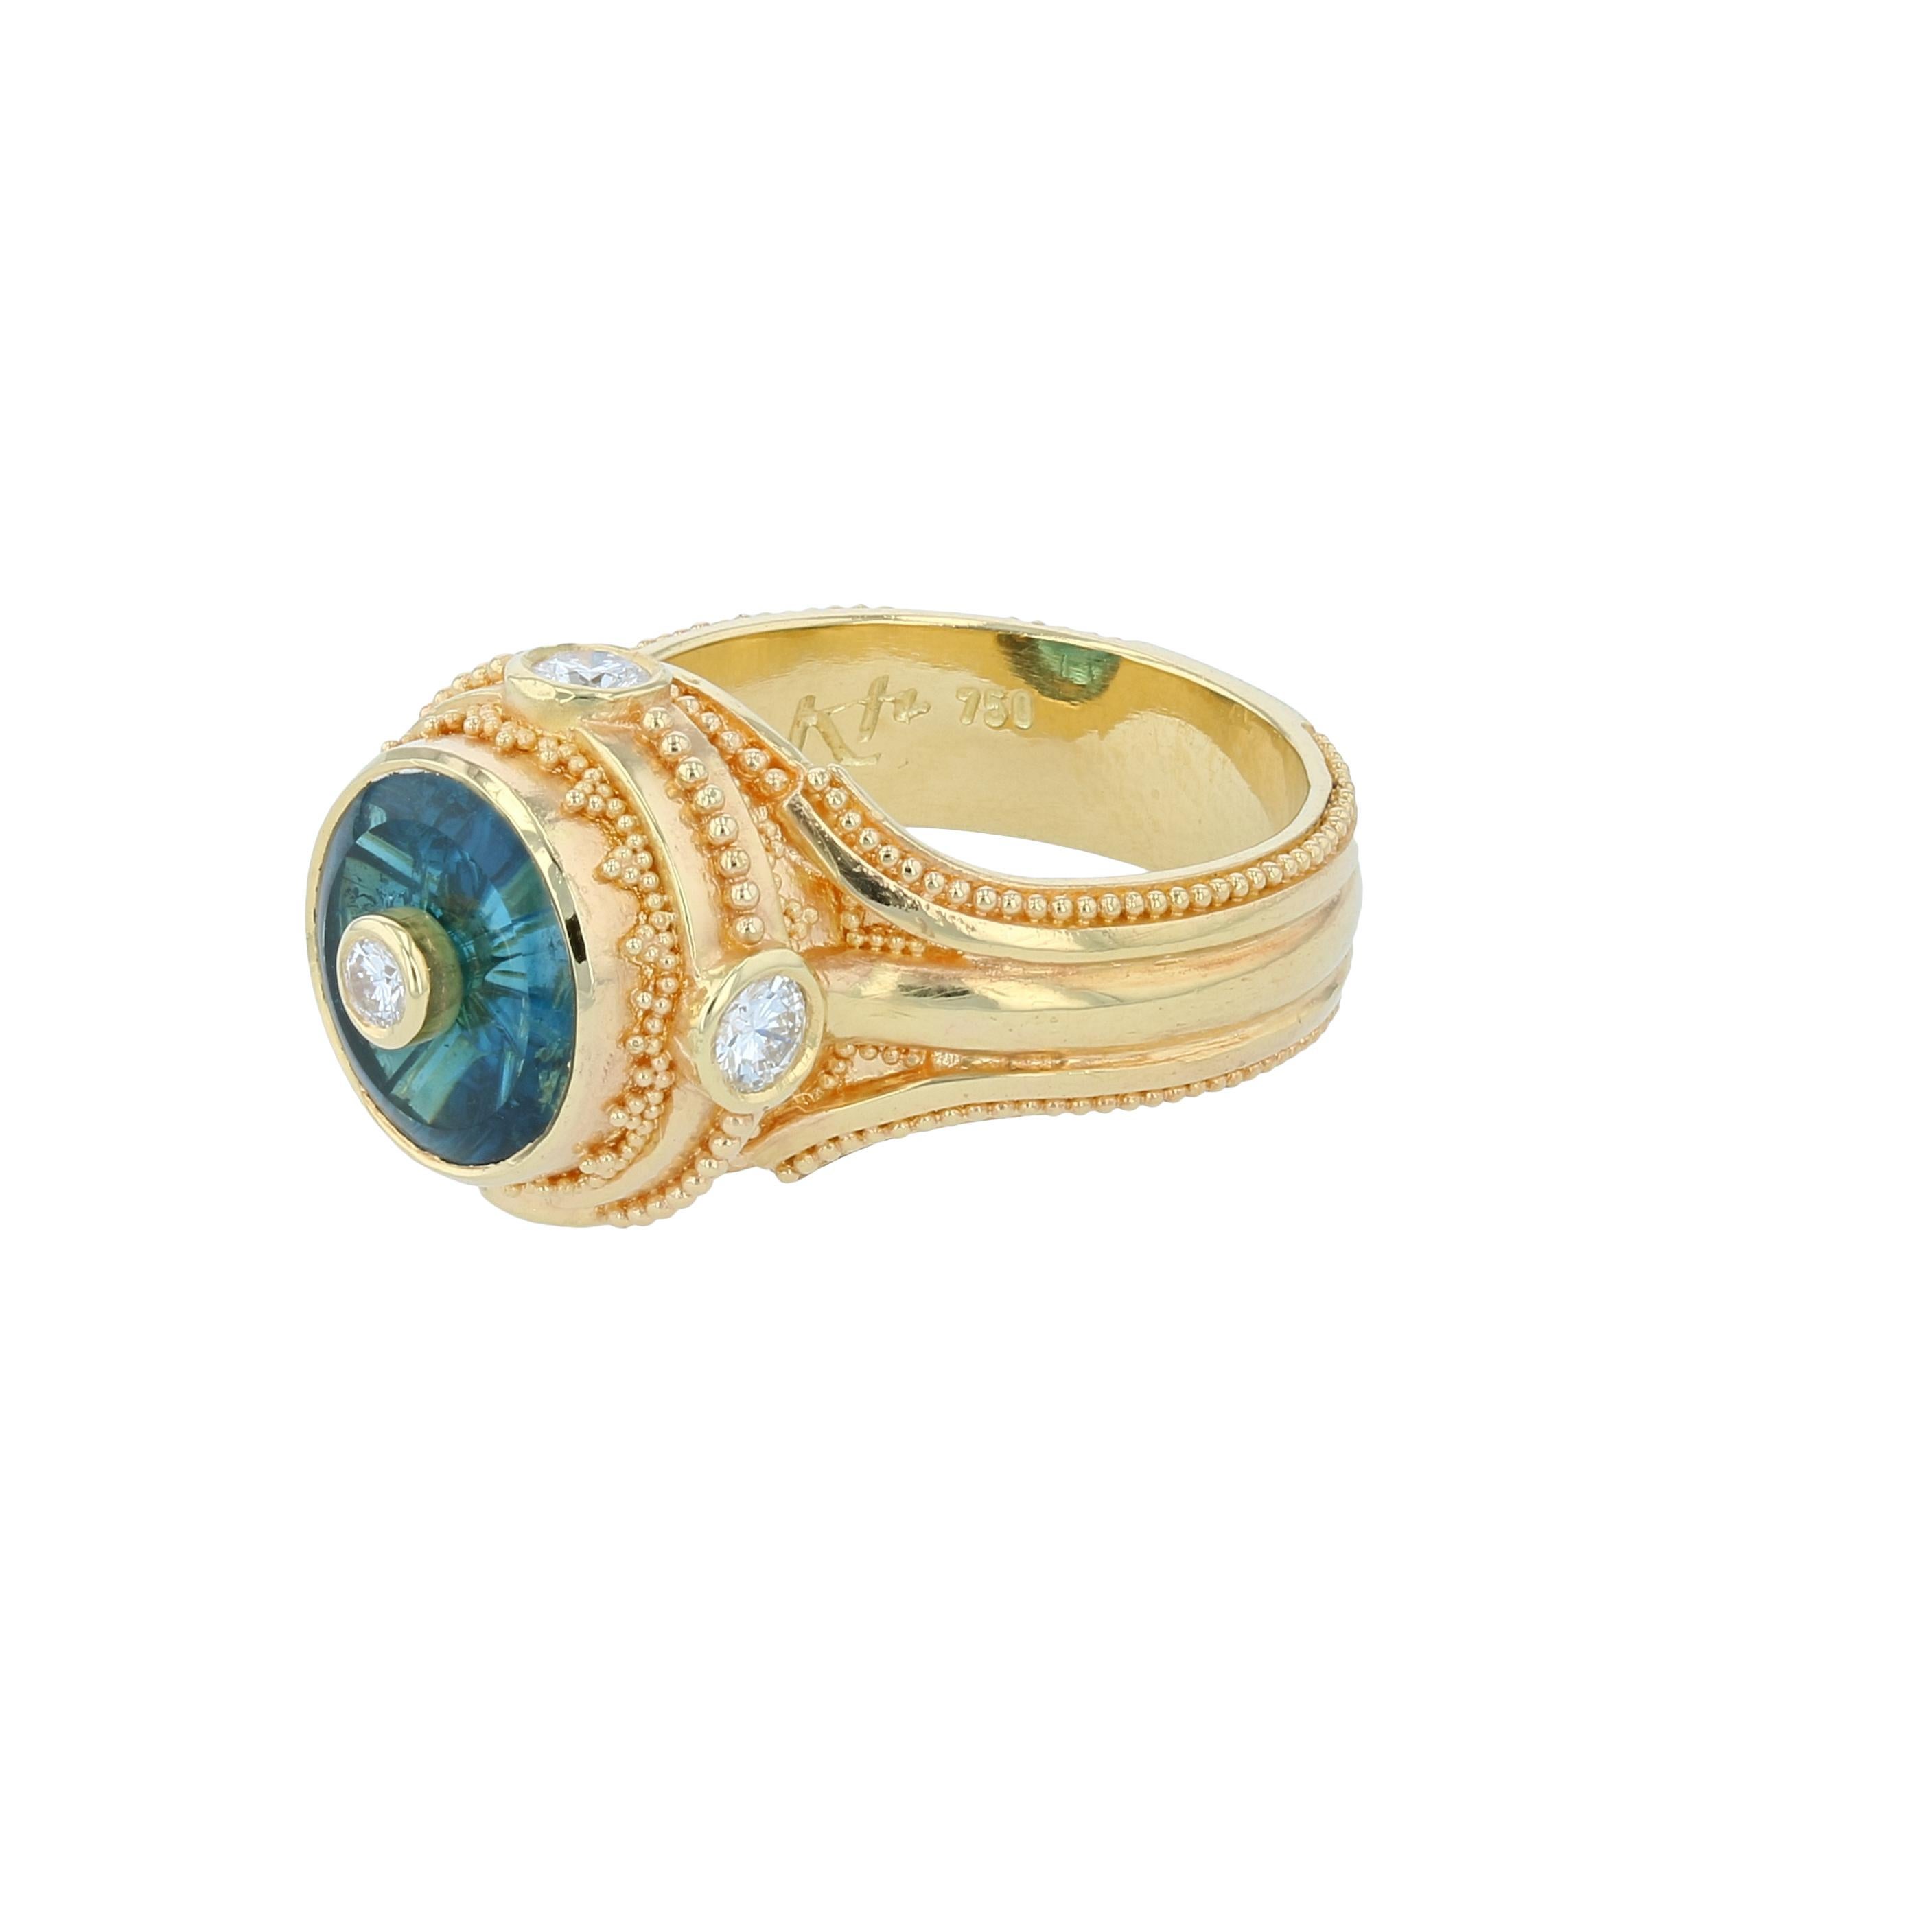 From the Kent Raible limited edition Studio Collection, we present the Prayer Wheel Ring.

The vivid Indicolite (blue-green) Tourmaline 'Torus' was cut by master gem carver Glenn Lehrer. The faceting is all cut on the underside of the gem creating a